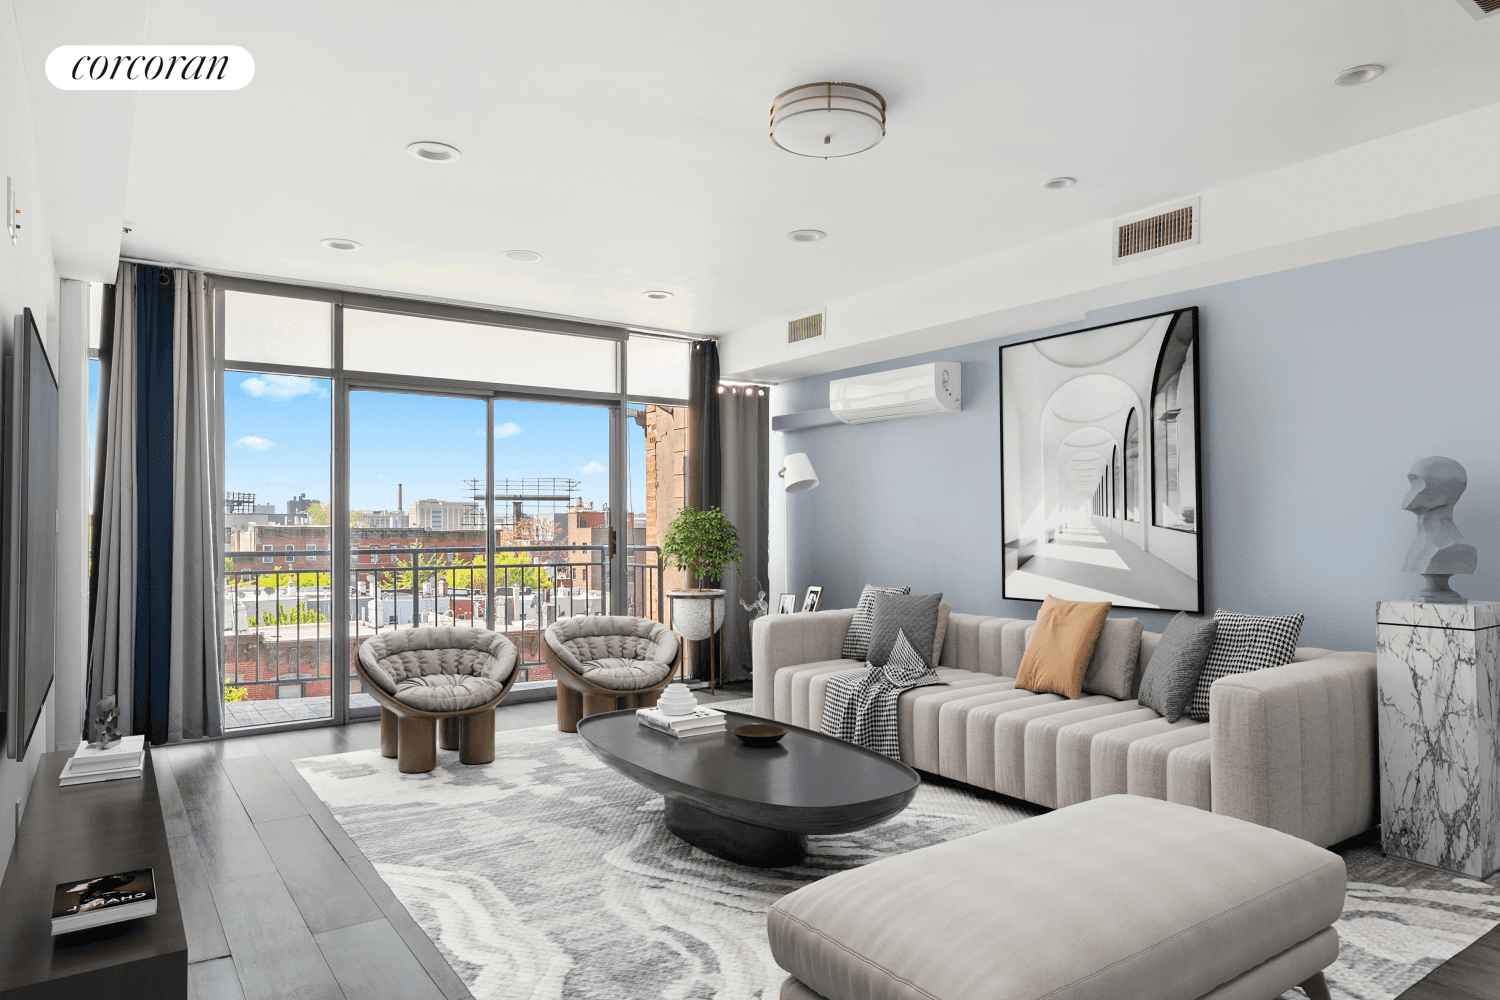 Welcome to 105 15th Street, Unit 5, a one of a kind penthouse offering an array of hot features in the heart of Brooklyn.